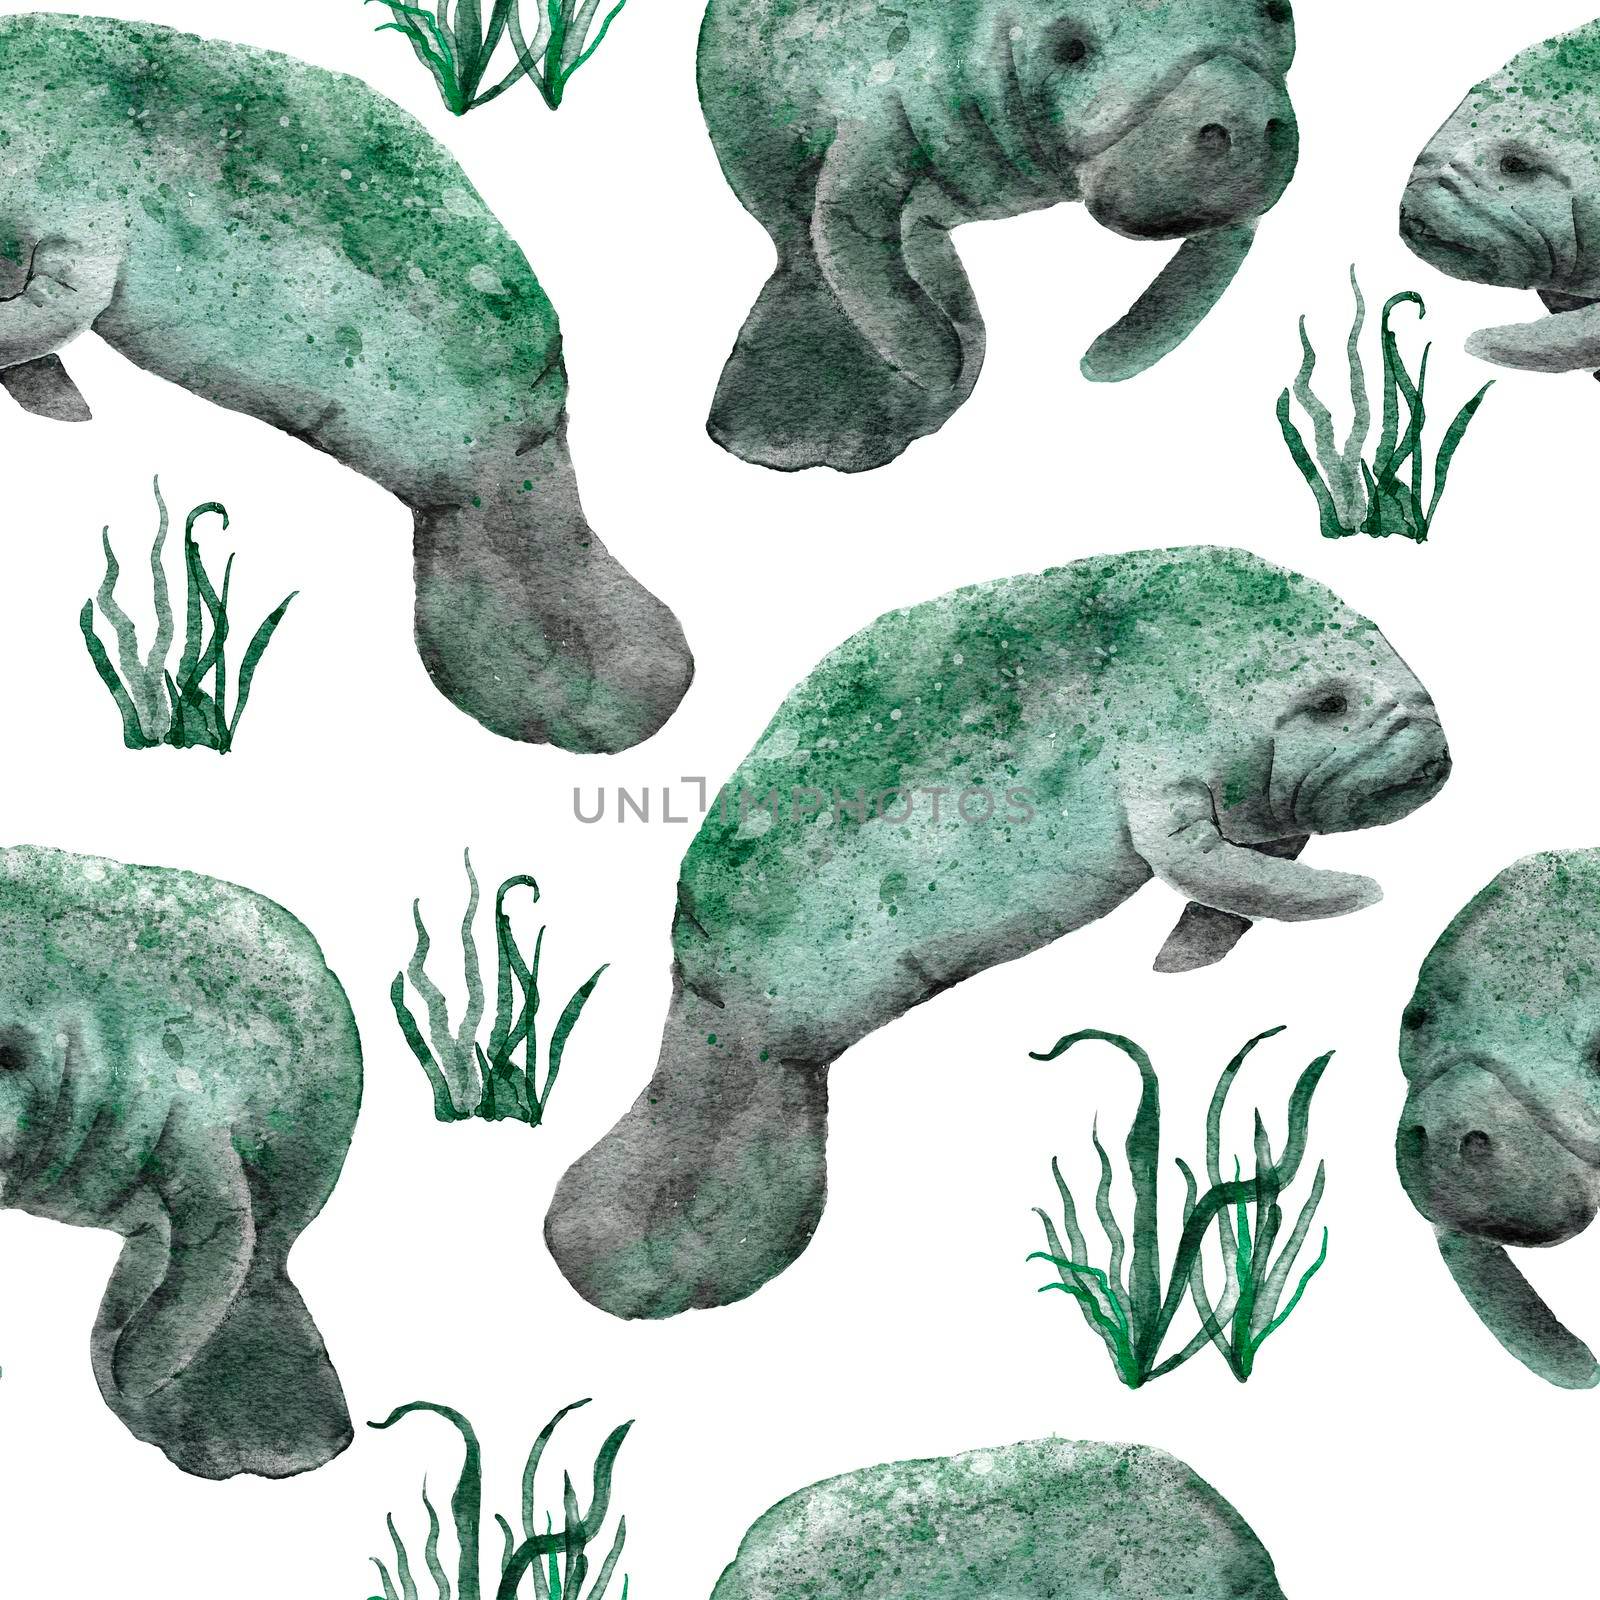 Hand drawn watercolor seamless pattern with manatee cow. Sea ocean marine animal, nautical underwater endangered mammal species. Blue gray illustration for fabric nursery decor, under the sea prints